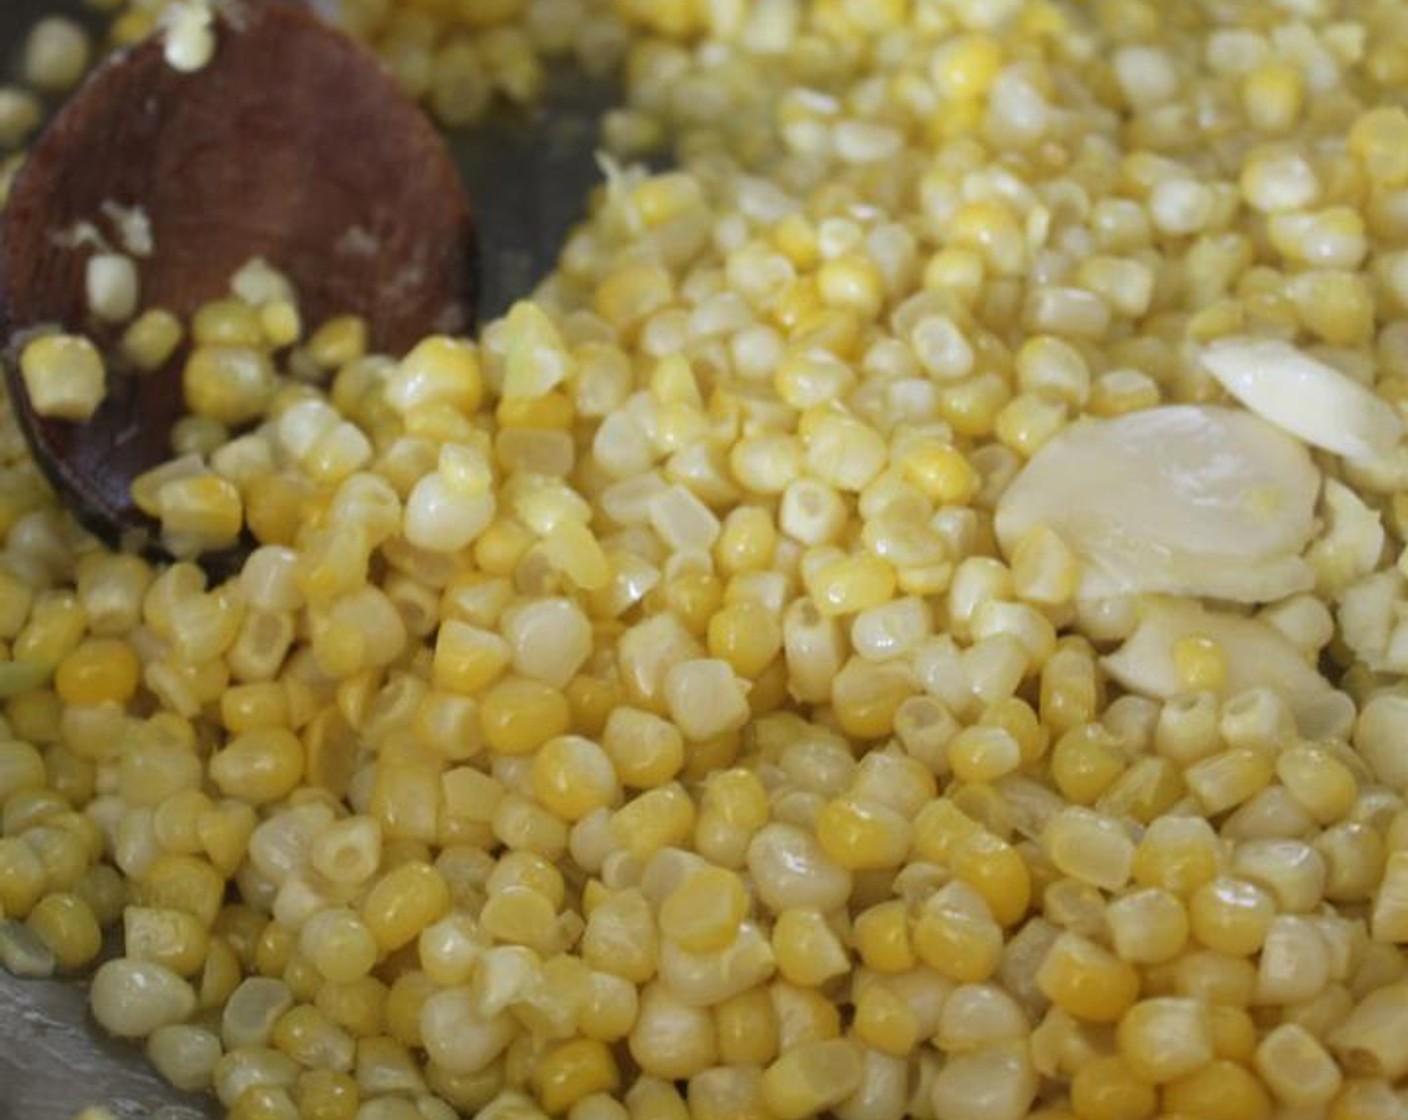 step 2 Add the Corn Kernels (3 1/2 cups), Garlic (2 cloves), and Kosher Salt (1/2 Tbsp) and cook for 8-10 minutes, stirring occasionally, until the corn is tender.